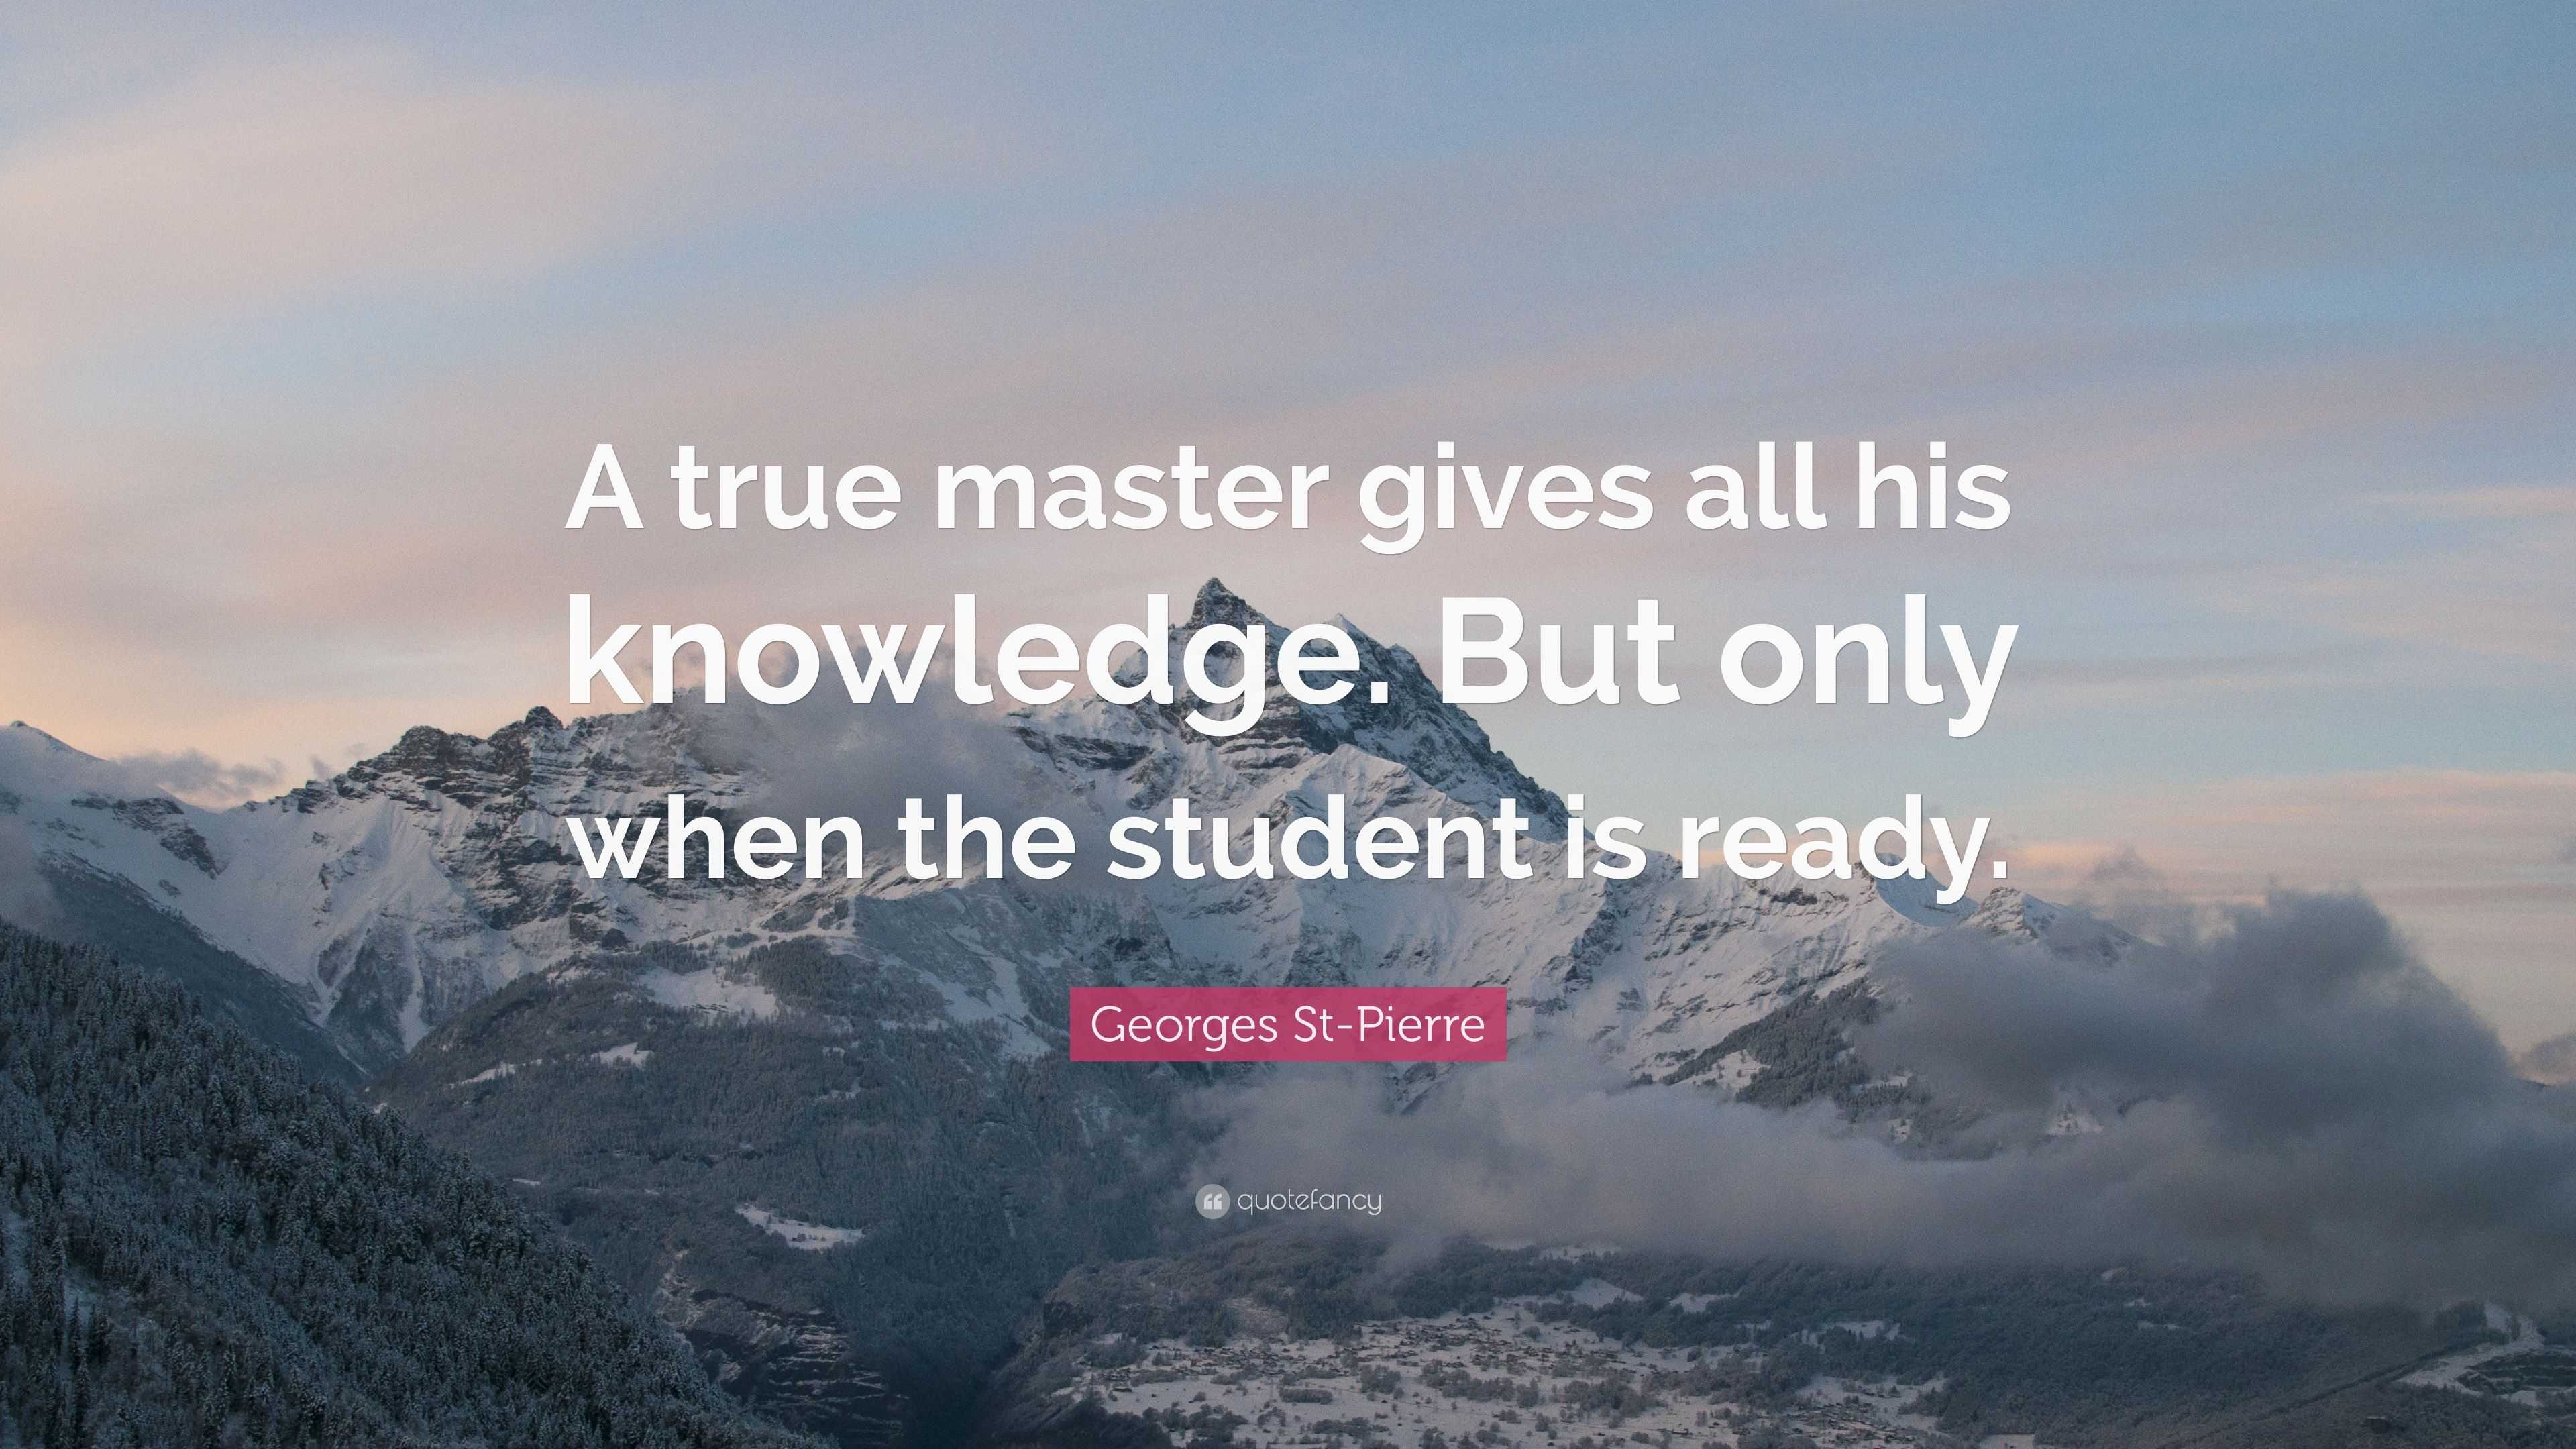 Georges St-Pierre Quote: “A true master gives all his knowledge. But ...